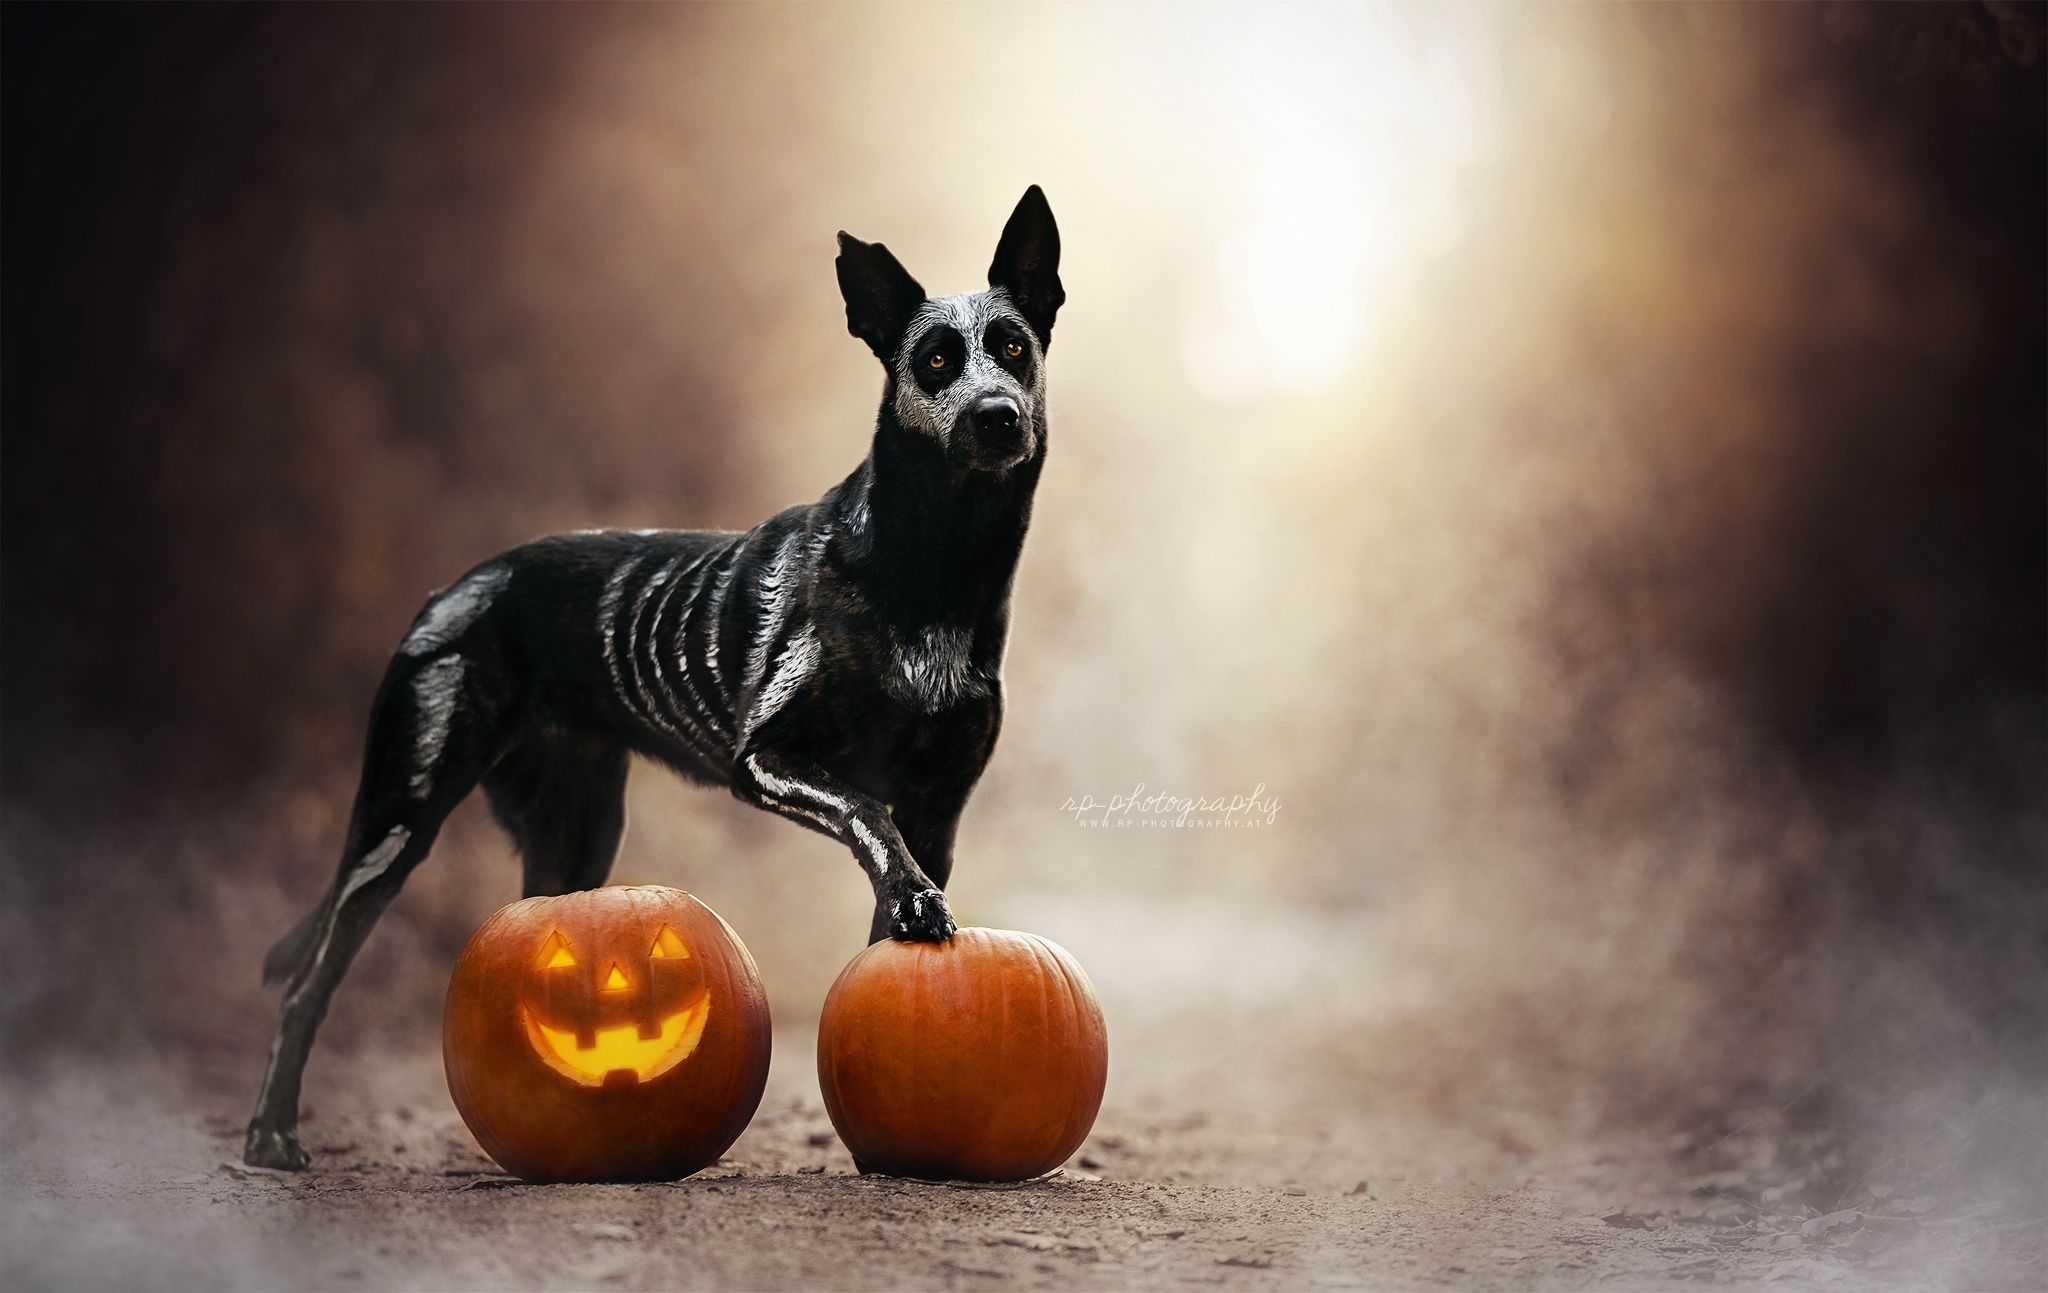 Dogs And Halloween Wallpapers - Wallpaper Cave